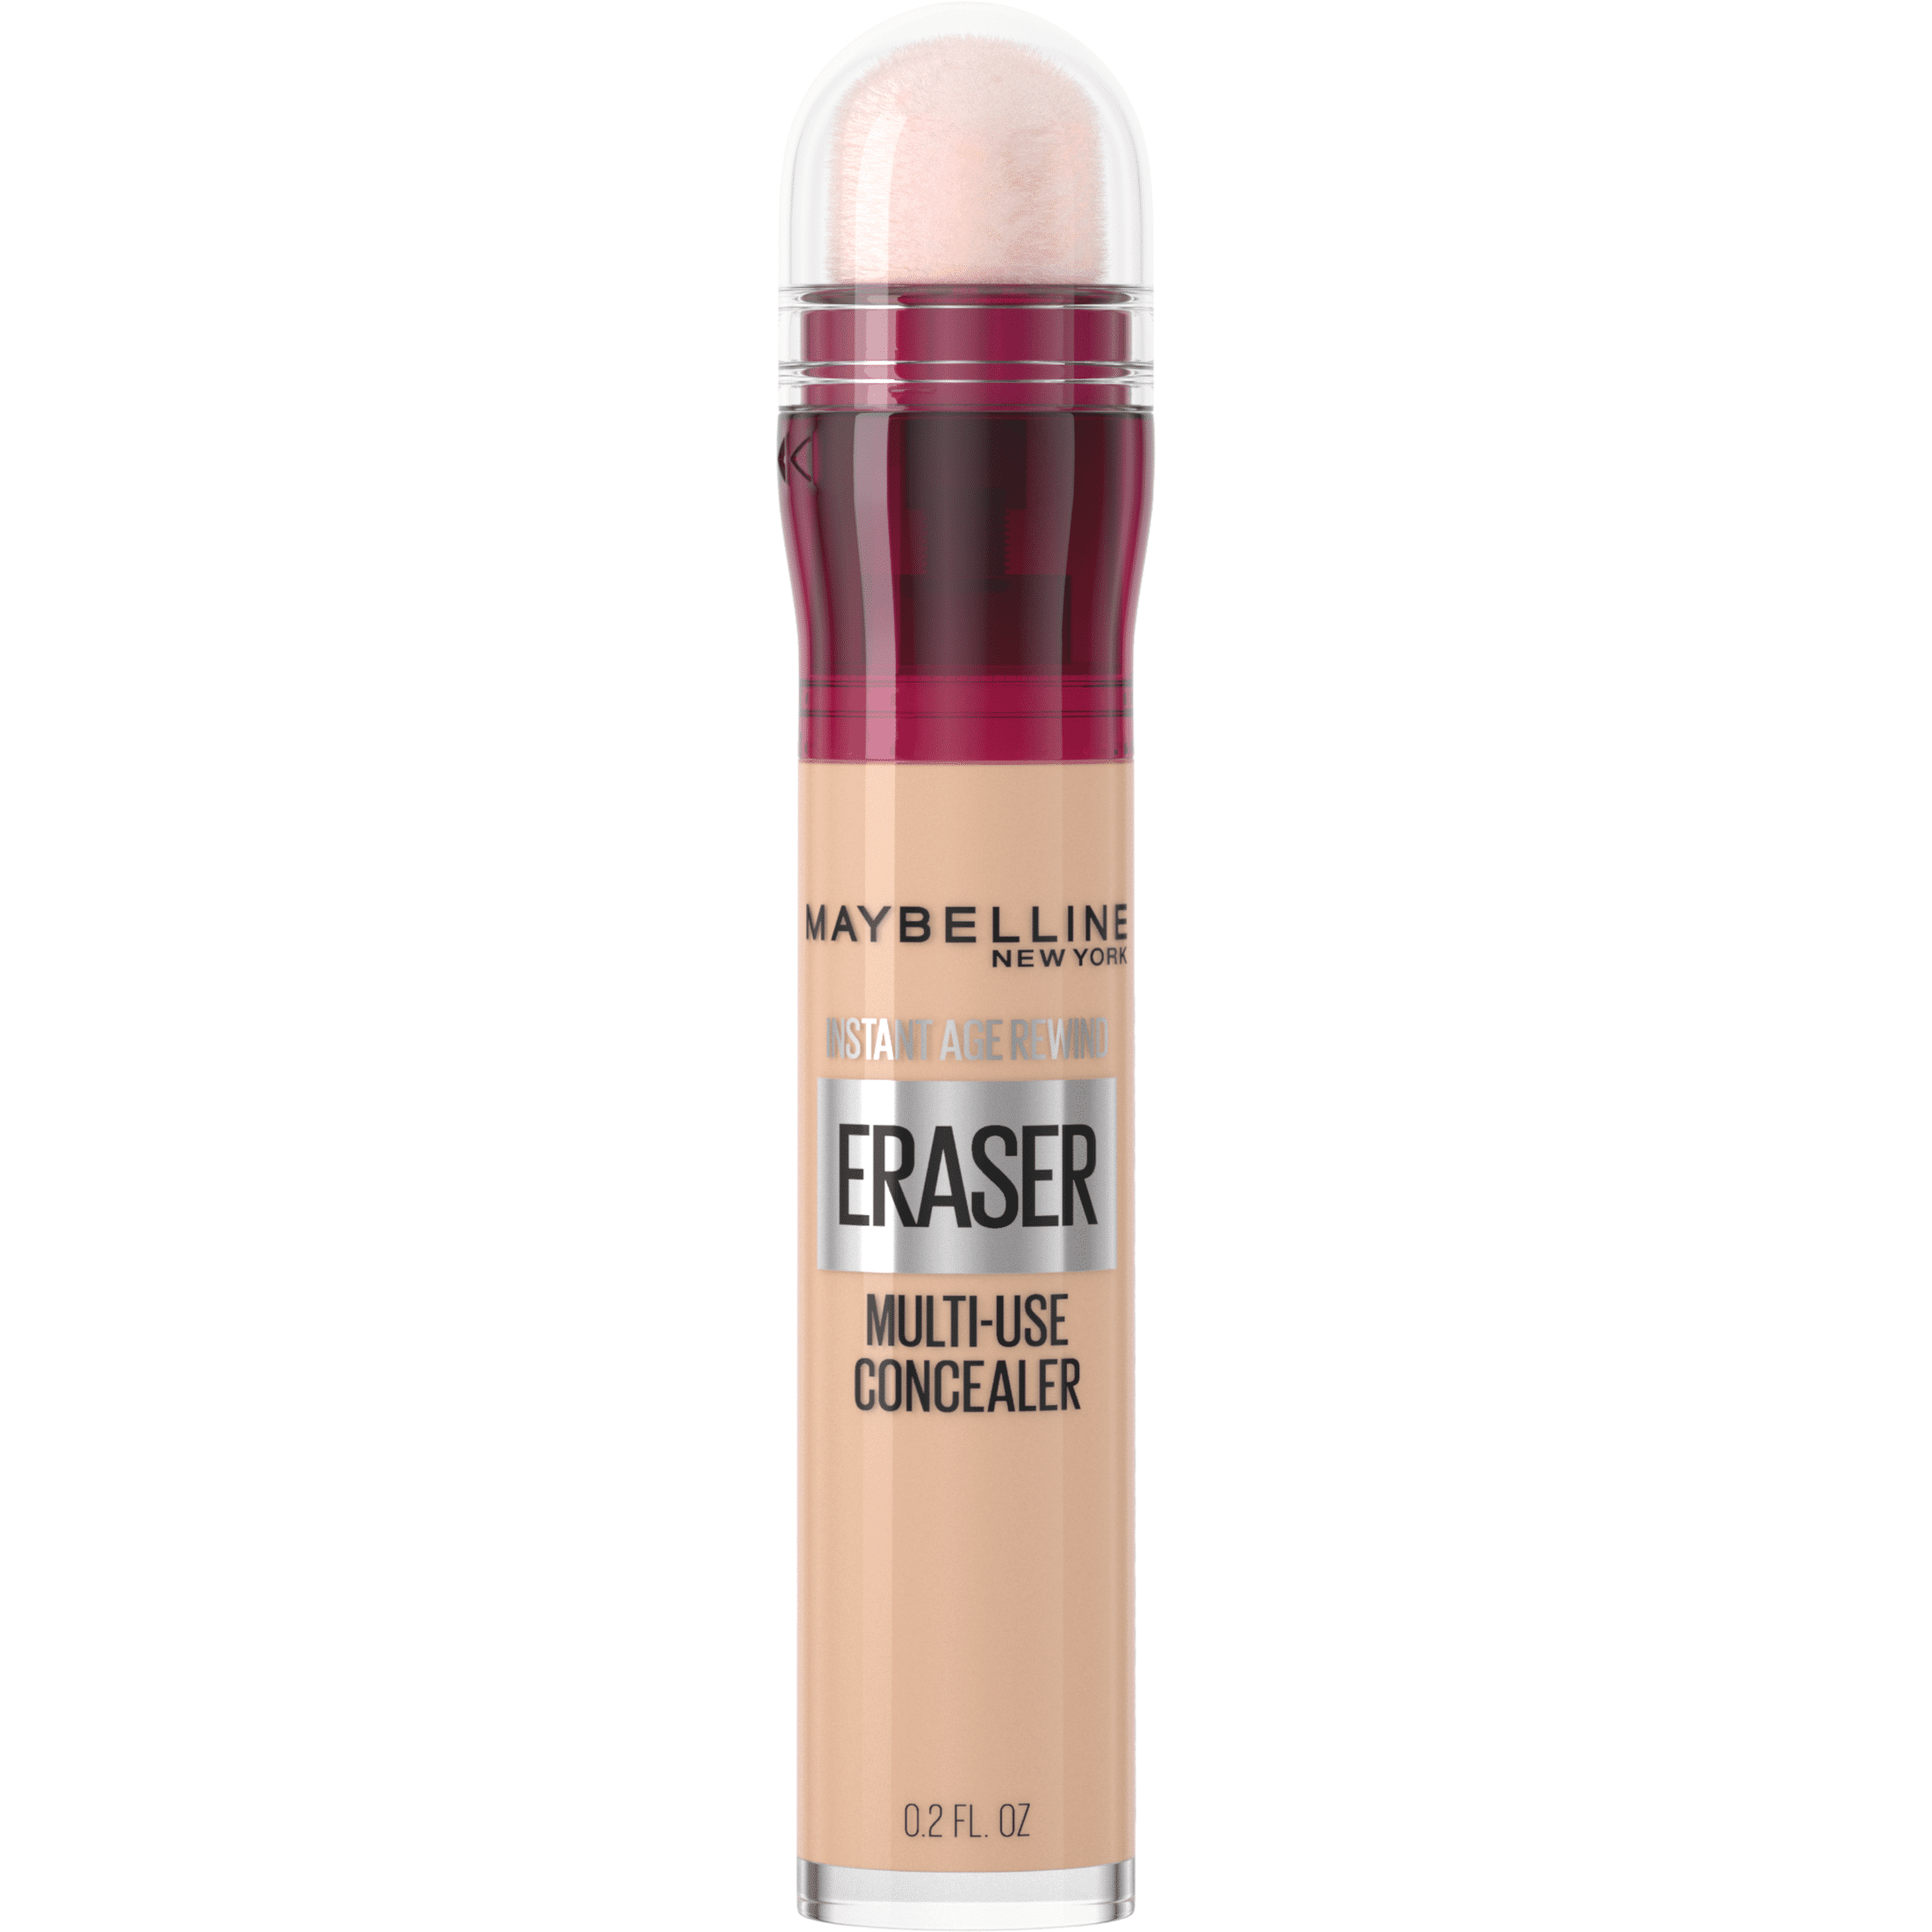 The Best Maybelline Products - A Beauty Edit